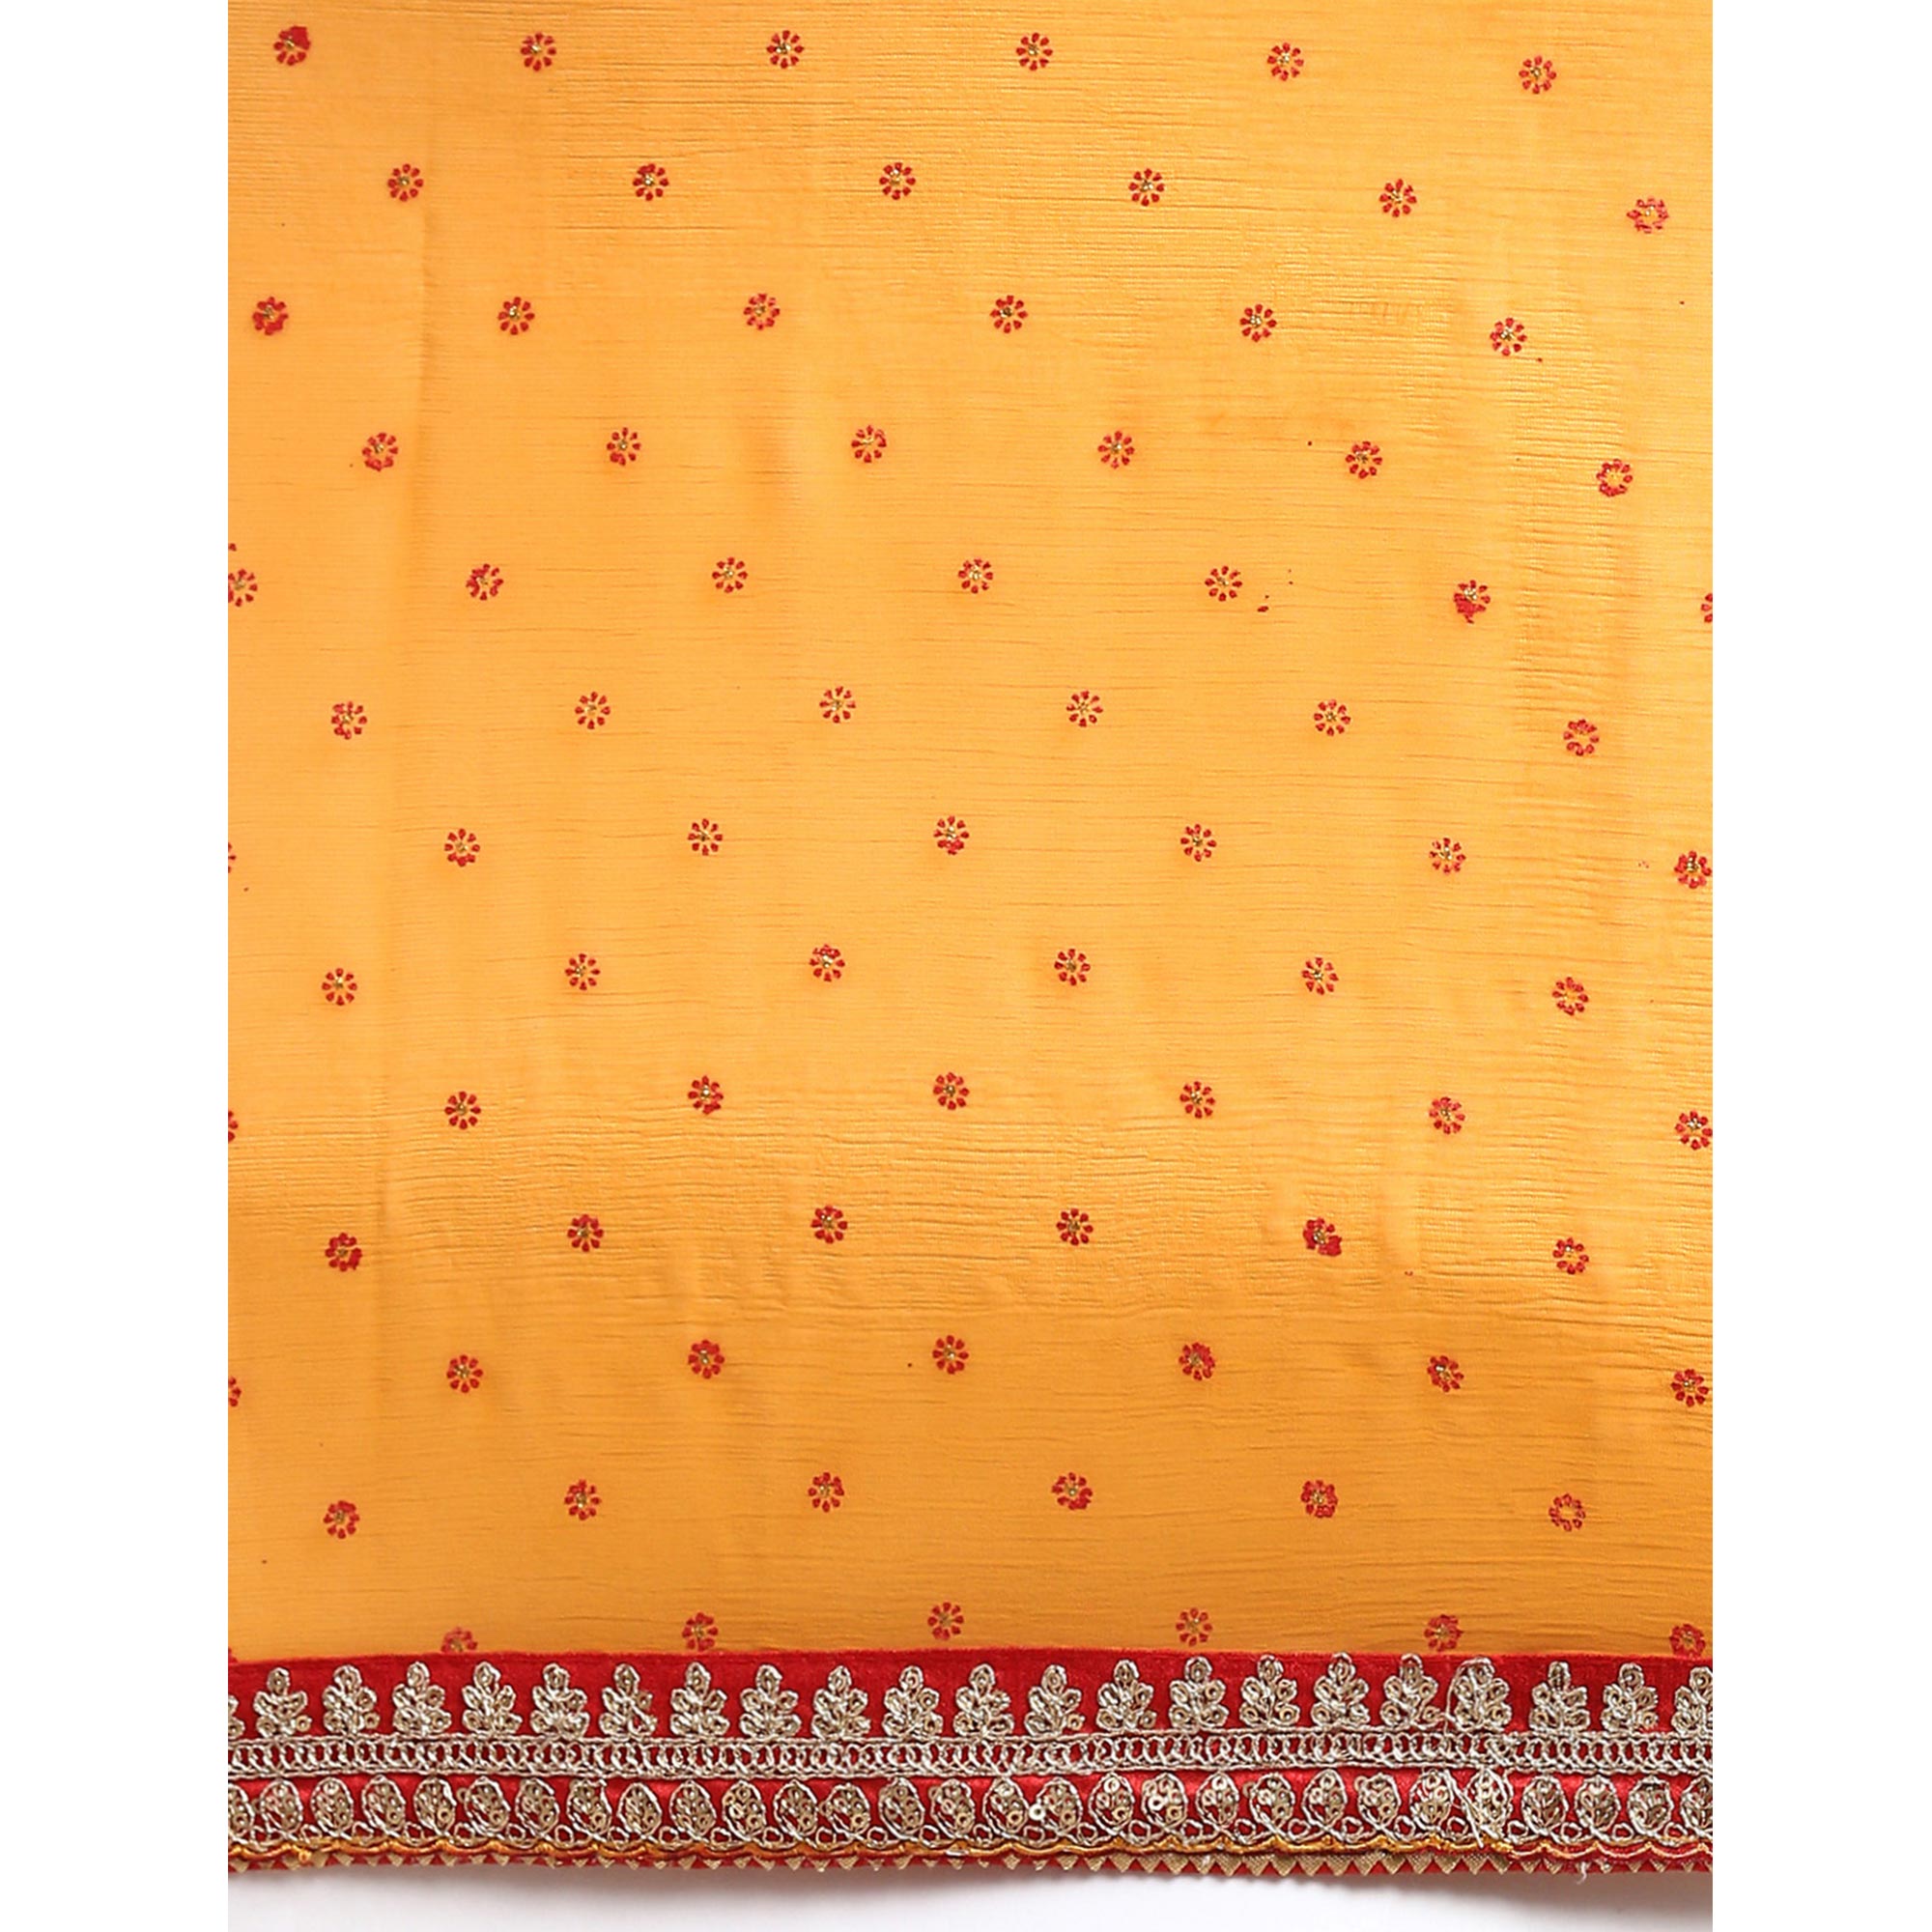 Yellow Foil Printed With Embroidered Border Chiffon Saree